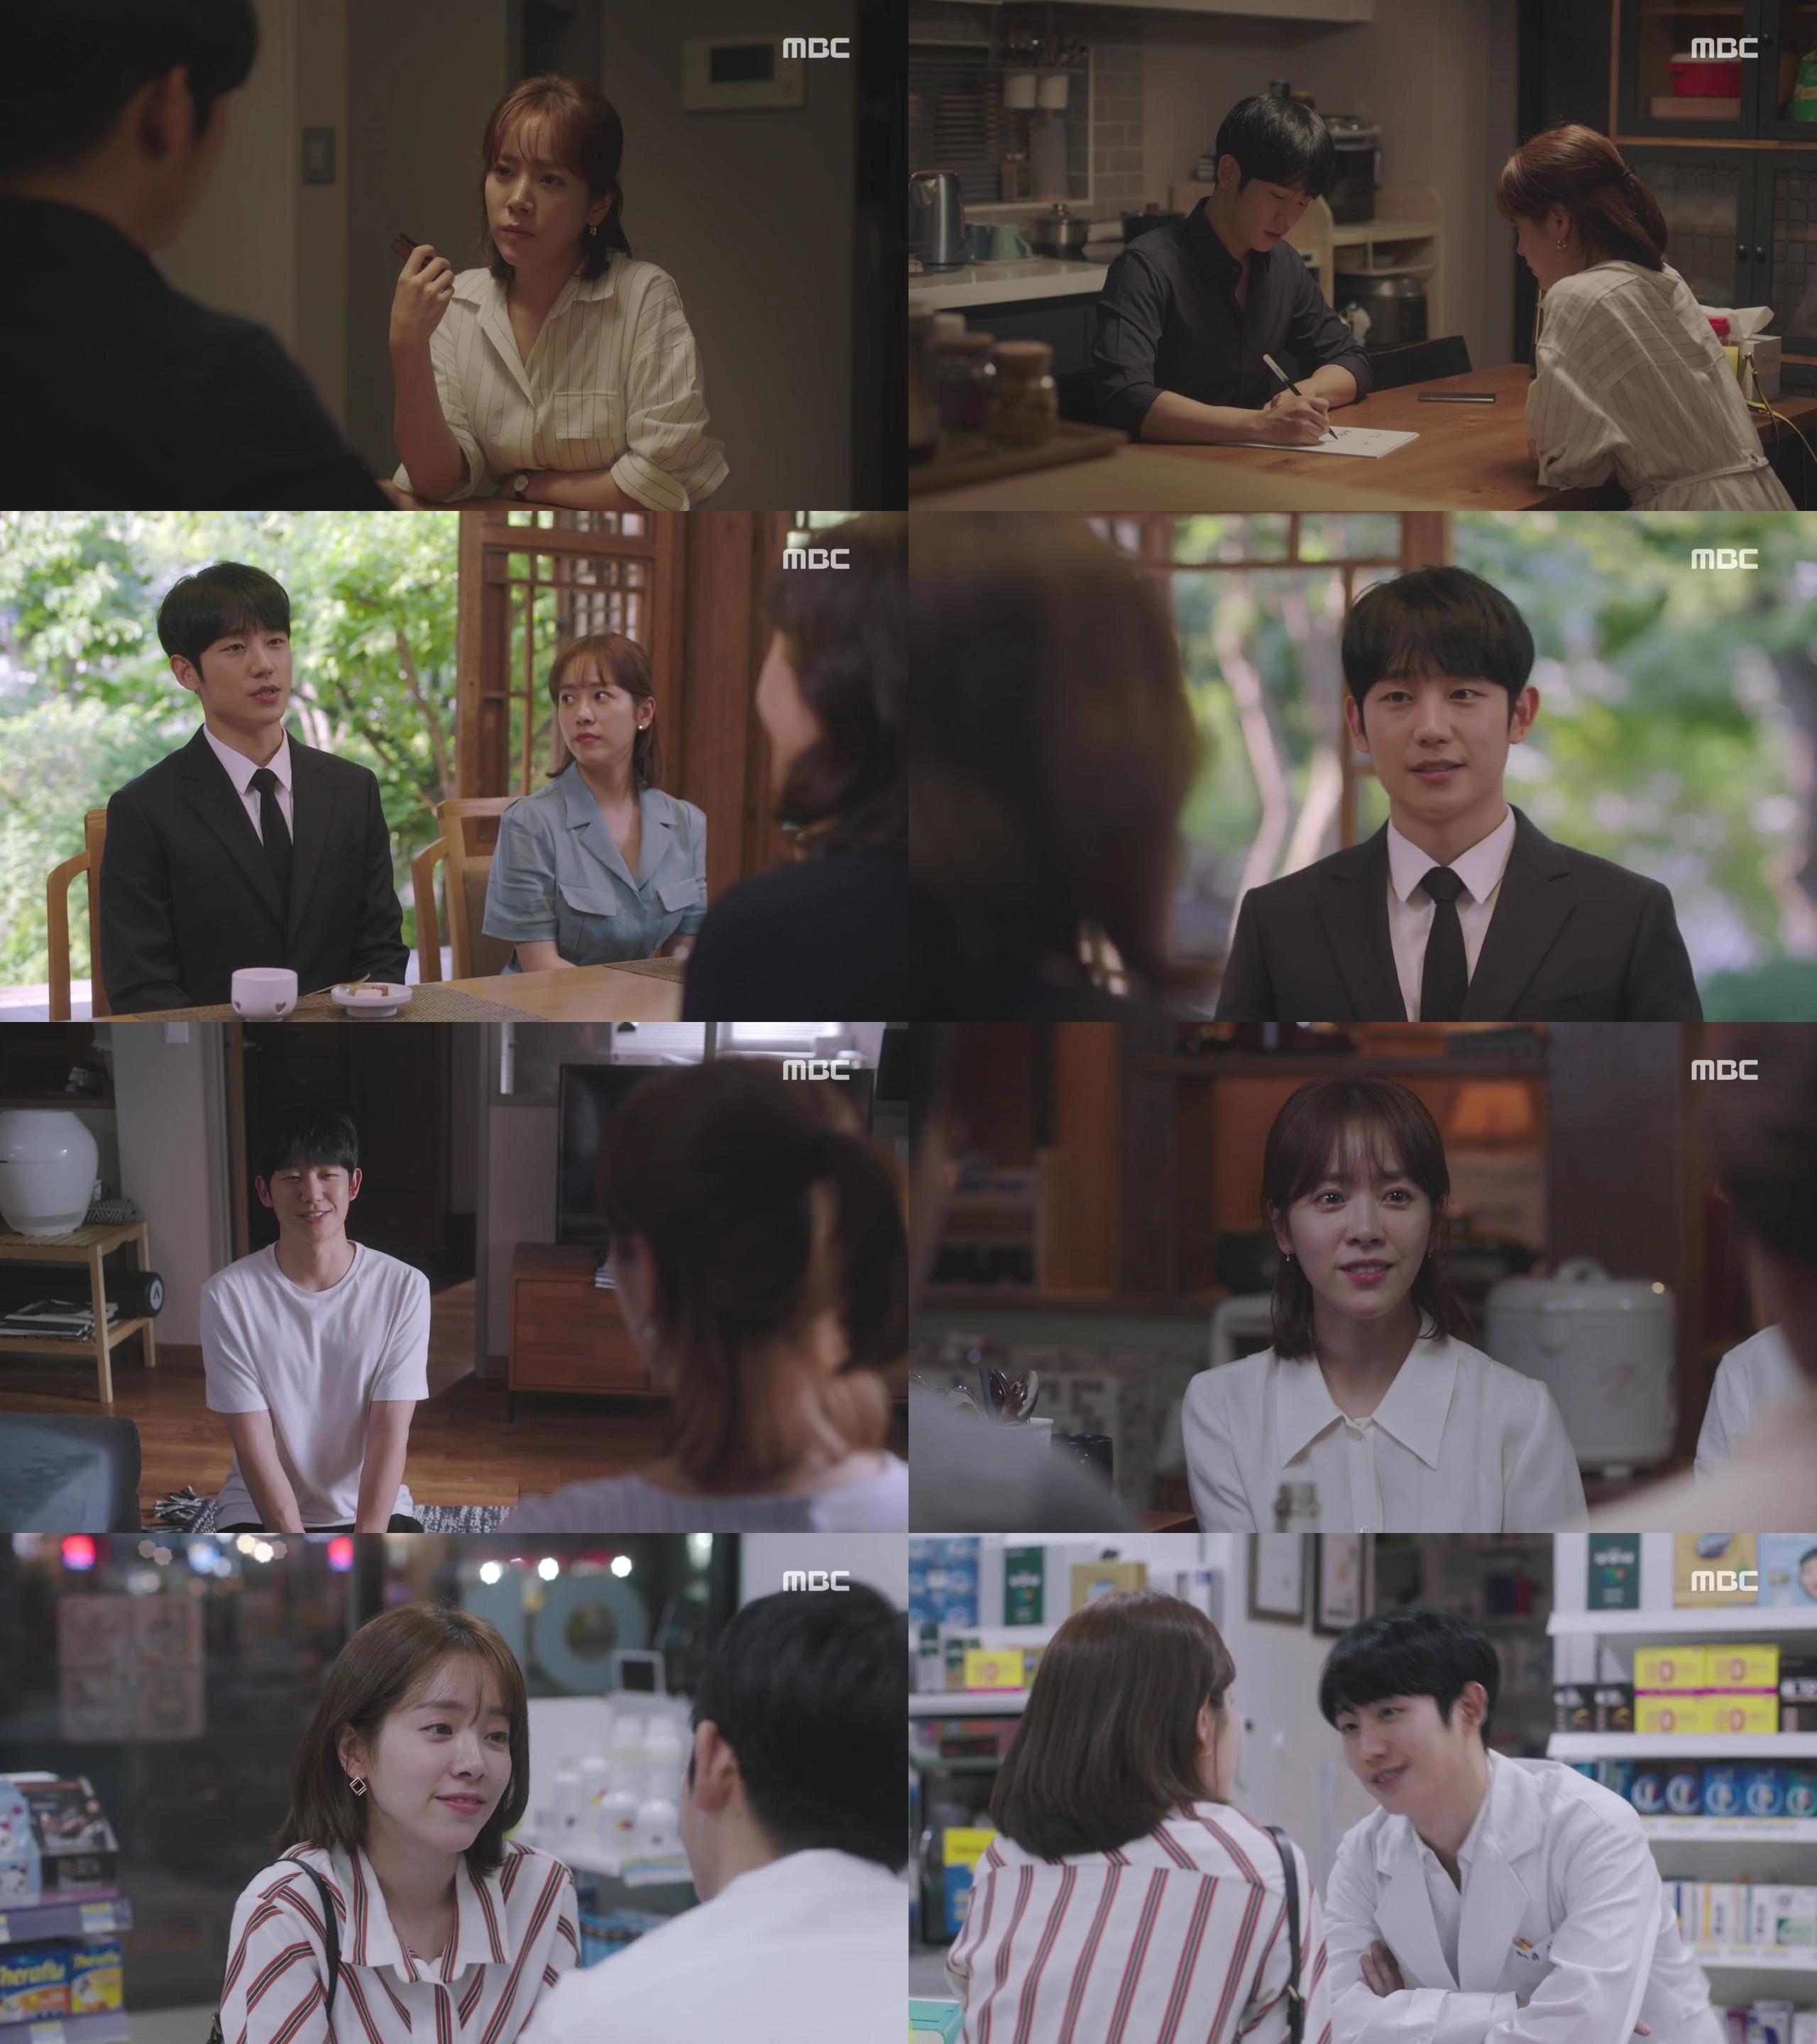 In the 31st and 32nd episodes of the MBC tree mini series Spring Night (directed by Ahn Pan-seok/playplayplay by Kim Eun/Produced by JS Pictures), Lee Choi Jung-in (Han Ji-min) and Yoo Ji-Ho (Jeong Hae-in) met a happy ending, promising to marry beyond hesitation and fear.Choi Jung-in and Jiho introduced each other to their families and gave a warm smile to the recognition of the meeting.Yoo Ji-Ho, who met Choi Jung-ins mother, Shin Hyung-sun (Gil Hae-yeon), said, Jung Eun-woo believes me only and can not collapse.Choi Jung-in is the same. I have only one person who believes in me, but I have to protect it no matter what. Lee Choi Jung-in also said, I will show you how to live happily with your mom and dad.I conveyed my affection and faith for Yoo Ji-Ho with the words Please believe me. I moved to the heart of Lee Tae-hak (Song Seung-hwan), who was the true determination of the two people.Yoo Ji-Ho also took Lee Jung-in to his parents home, who told Yoo Ji-Hos parents: I know youre worried.I hope youll do less. Ill be pretty with each other. And Ill do my best to Jung Eun-woo.The two people who faced each other showed a very happy smile.Choi Jung-in, who drank with Yoo Ji-Hos parents, woke up in Jung Eun-woos room and Yoo Ji-Ho demanded a memorandum as Lee Choi Jung-in did.Yoo Ji-Ho received a cute memorandum saying, You must marry Yoo Ji-Ho; you will become a virgin ghost in violation and laughed.Lee Chung-in and Yoo Ji-Ho were recognized by both parents for their sincerity toward each other and gave a warm ending.The two people who kissed and recalled their first meeting at the pharmacy finished the romance of warm and sweet people like spring day.Kim, who draws delicate feelings while talking with director Ahn Pan-seok, a melodramatic melodrama master of lyrical visual beauty, has been interested in numerous drama fans since the broadcast.Especially, with the ambassador and emotion that is realistic and sympathetic, I built a more solid mania group after the previous work Beautiful Sister who buys rice well.Here, the fantastic synergy between Han Ji-min and Jung Hae-in led to the deep immersion of the house theater.Jung Hae-in showed the situation and feelings of the character every time with delicate expressive power and deep acting power, and left a deep afterglow every time.Han Ji-min also improved the perfection by coordinating the completion with the moderation and expression of emotions according to the situation.From the boredom of long-time lovers and everyday life, the shaking and conflict of the moment when new emotions came, the various forms of love and the worries about it, and the story that everyone would have experienced once, were drawn calmly but without boredom, and gave a dense sympathy.Meanwhile, the final episode of Spring Night recorded an audience rating of 10.8% (based on the Nielsen Korea metropolitan area), breaking its own highest audience rating and taking the top spot in the entire drama.2049 The audience rating also recorded 3.4%, ranking first in the same time zone, and as the strongest player in the tree drama until the end,